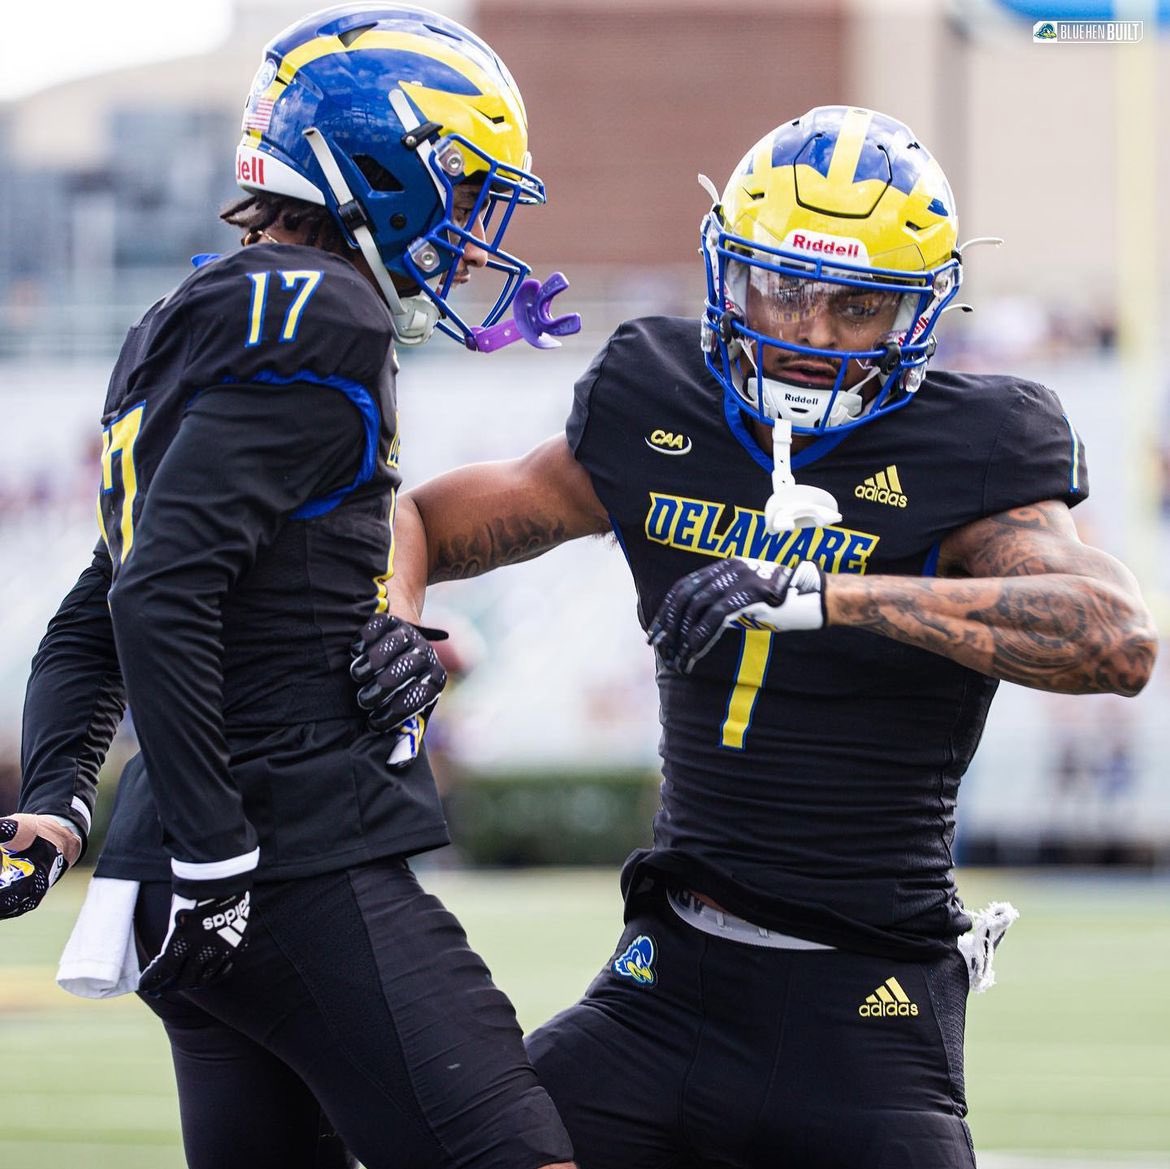 Blessed to receive an Offer From University of Delaware!! @Coach_ArtLink  #GoHens 

@twanDaBoss @Mobellent @Andrew_Ivins @adamgorney @JohnGarcia_Jr @MohrRecruiting @ChadSimmons_